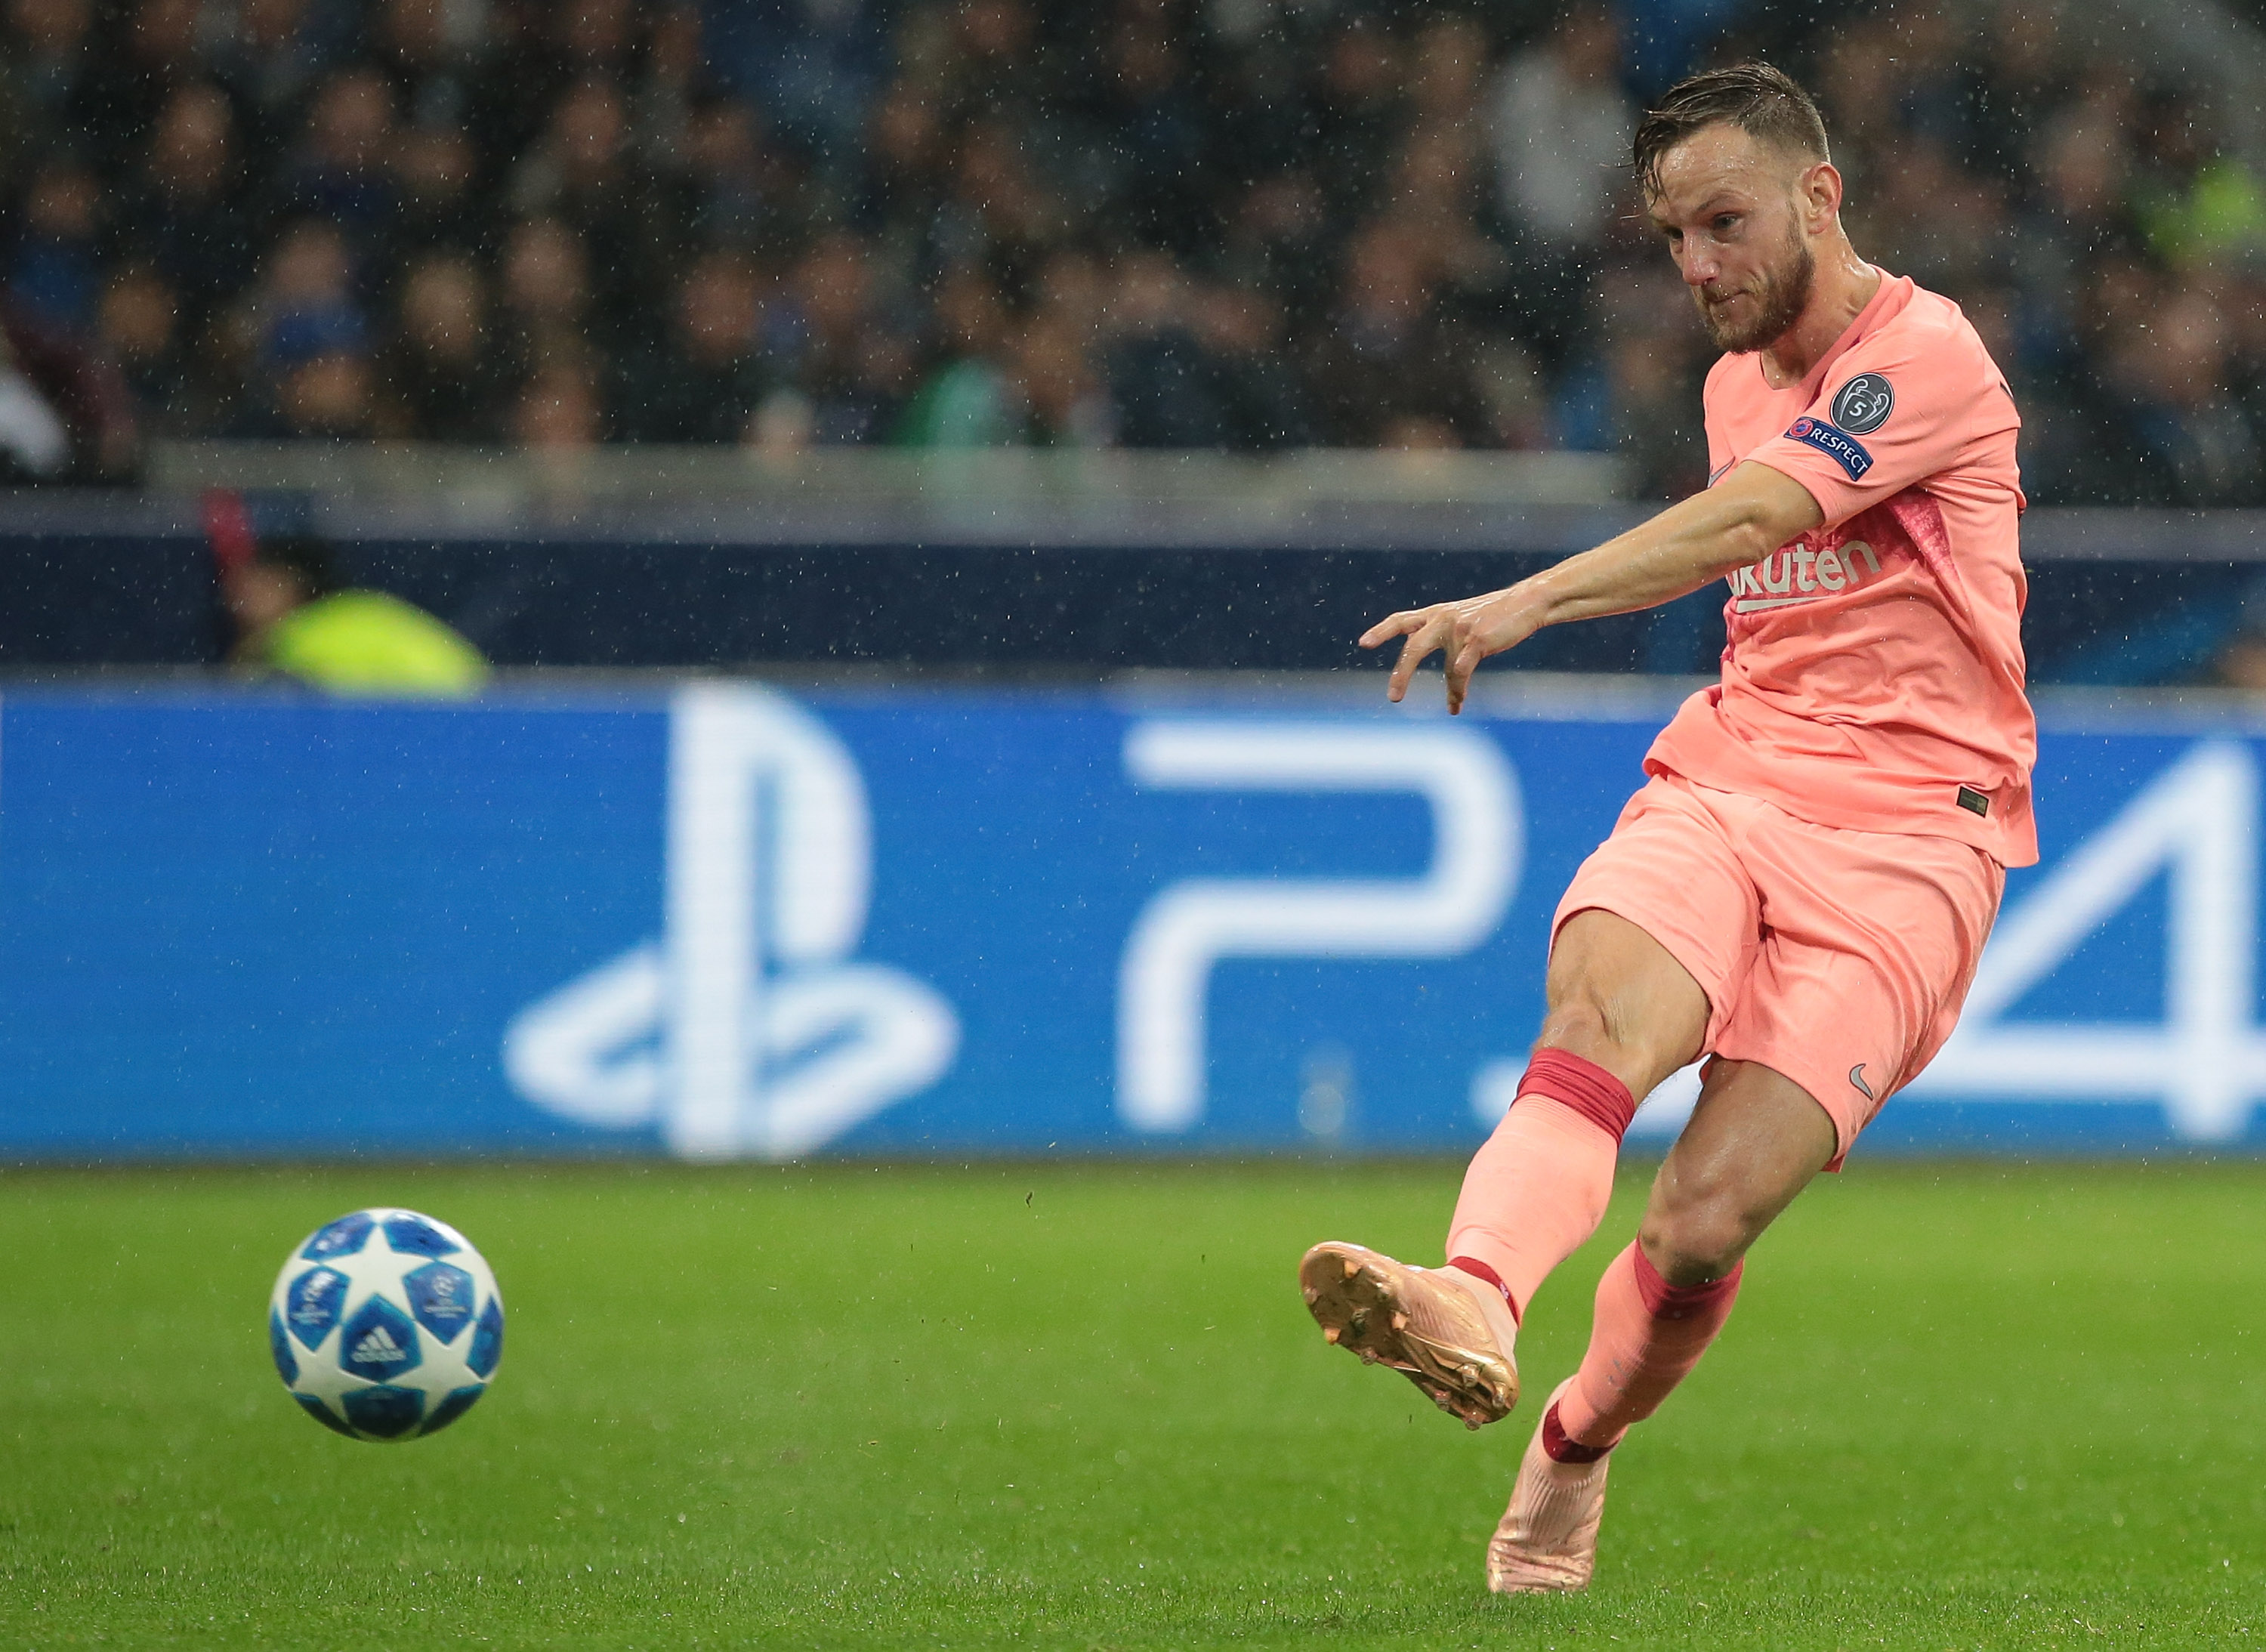 MILAN, ITALY - NOVEMBER 06:  Ivan Rakitic of FC Barcelona kicks the ball during the Group B match of the UEFA Champions League between FC Internazionale and FC Barcelona at San Siro Stadium on November 6, 2018 in Milan, Italy.  (Photo by Emilio Andreoli/Getty Images)